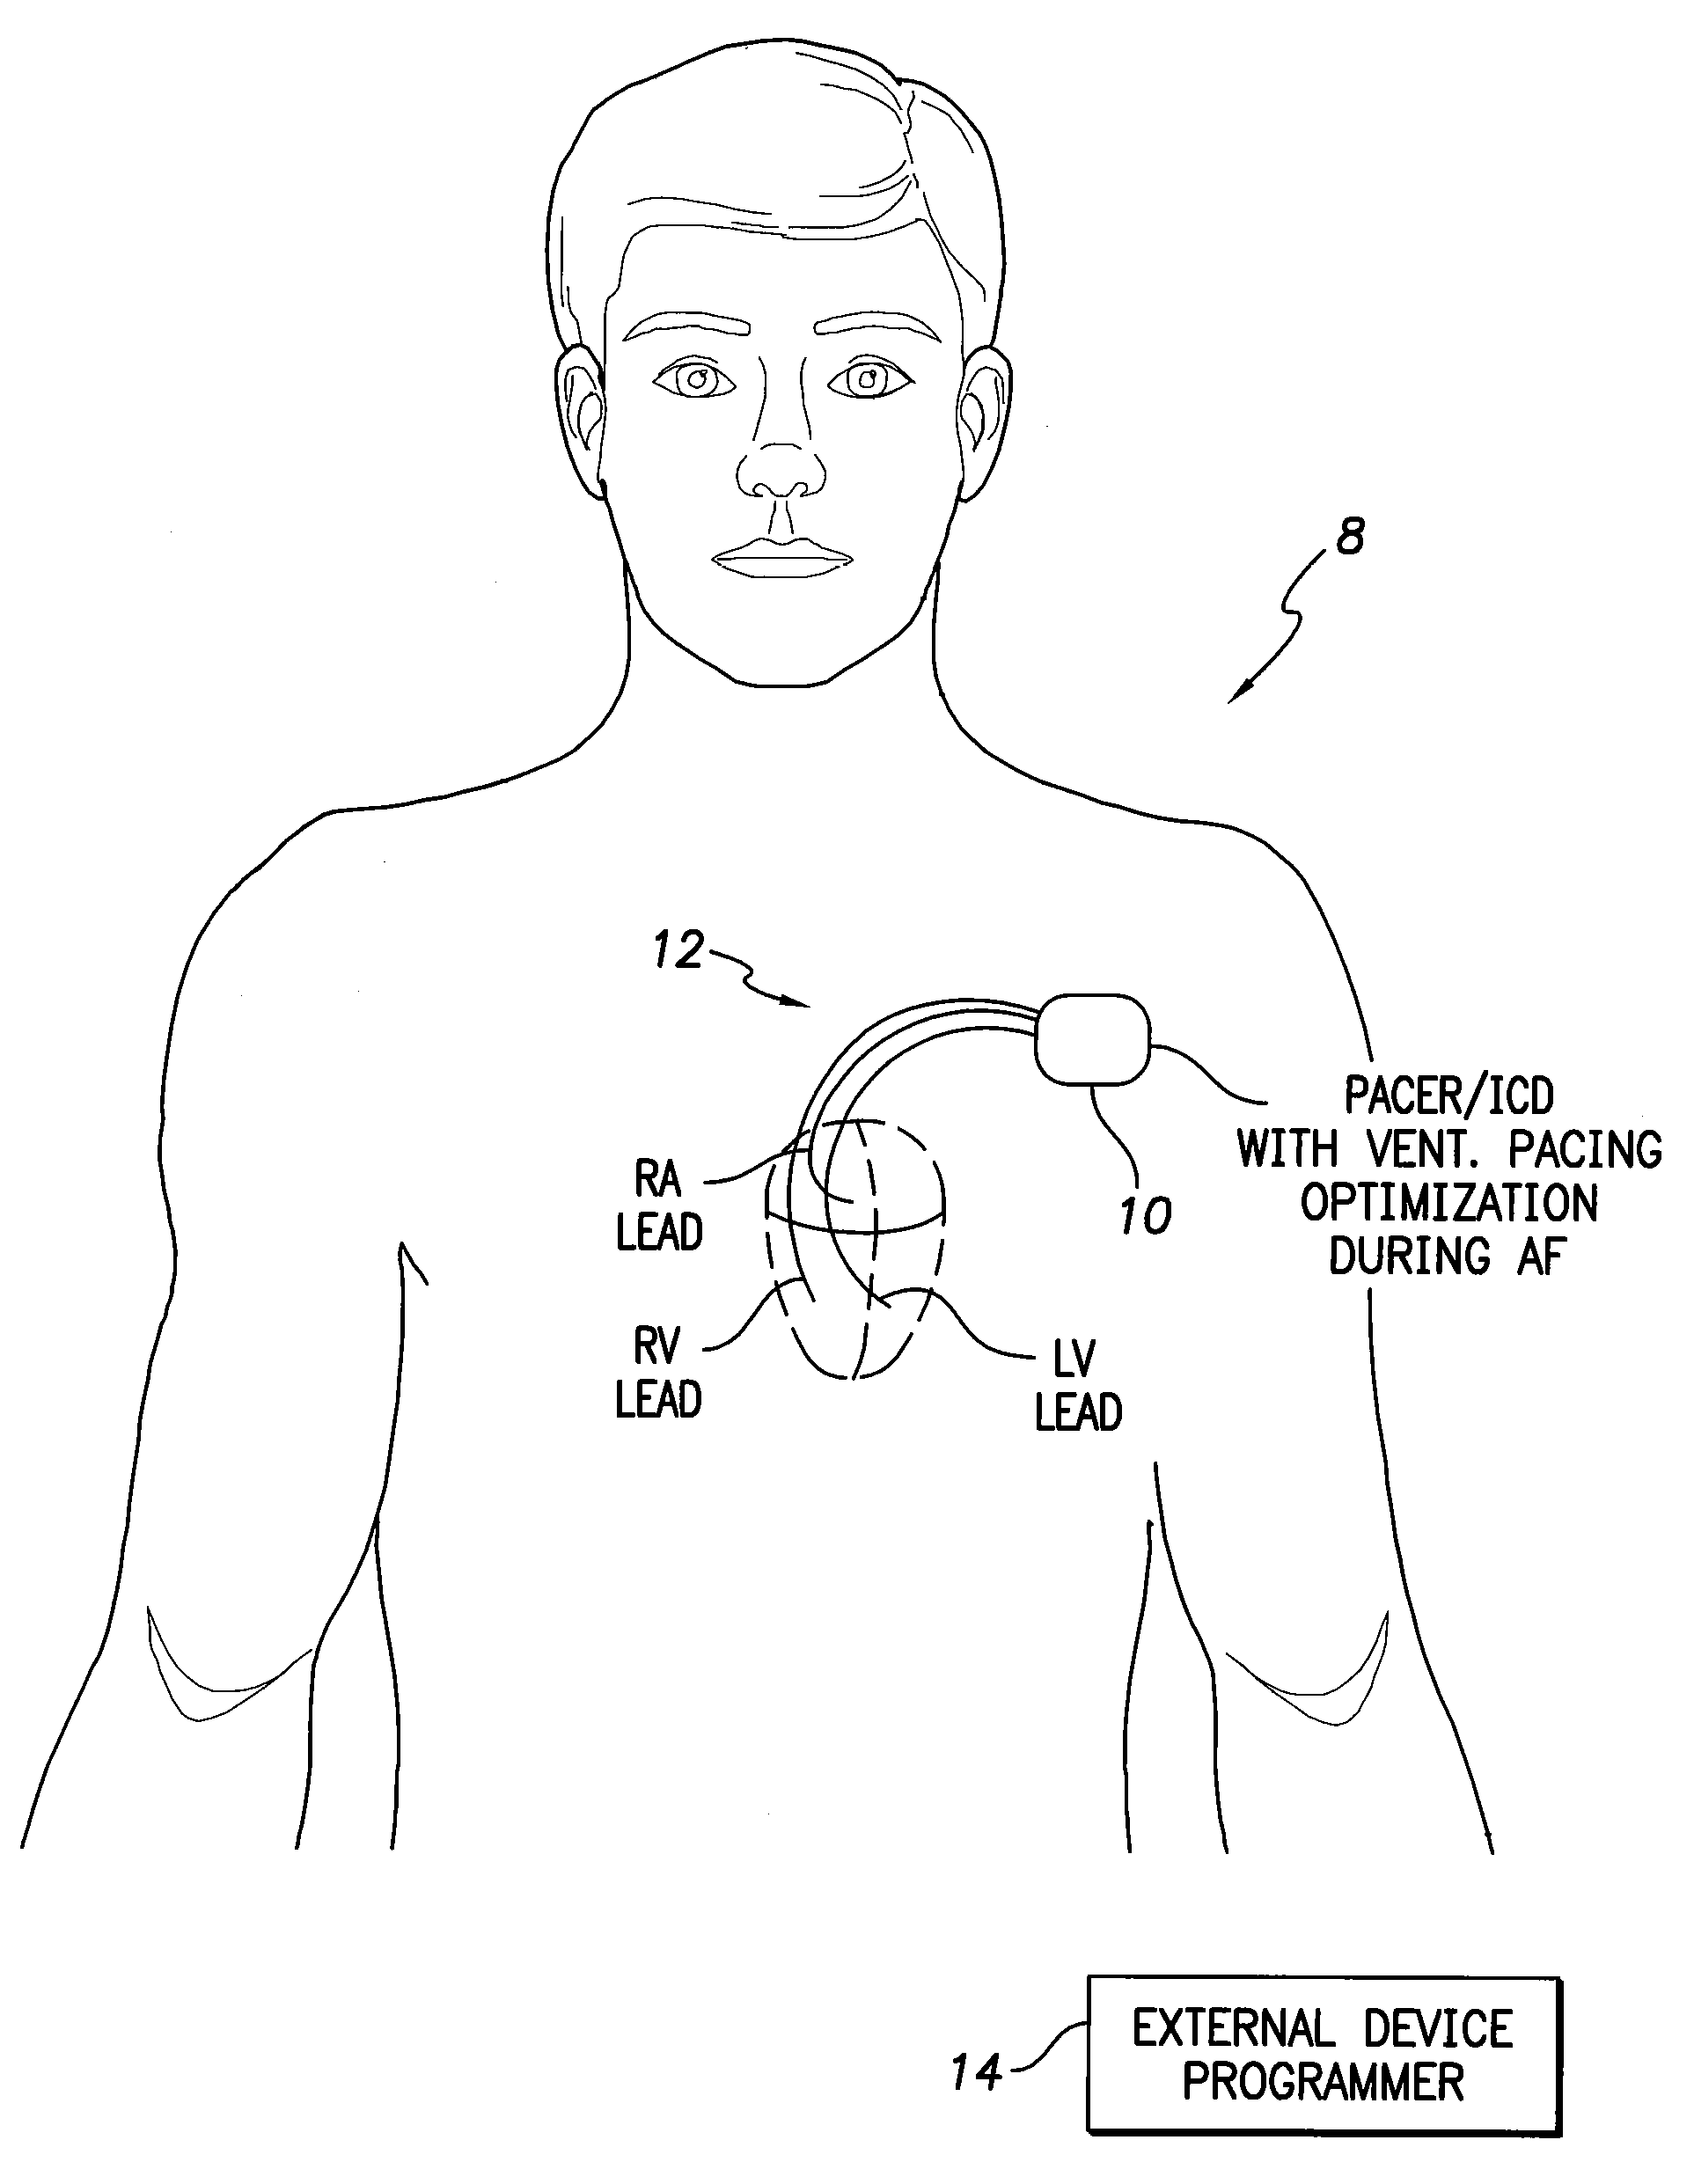 Systems and methods for optimizing ventricular pacing delays during atrial fibrillation